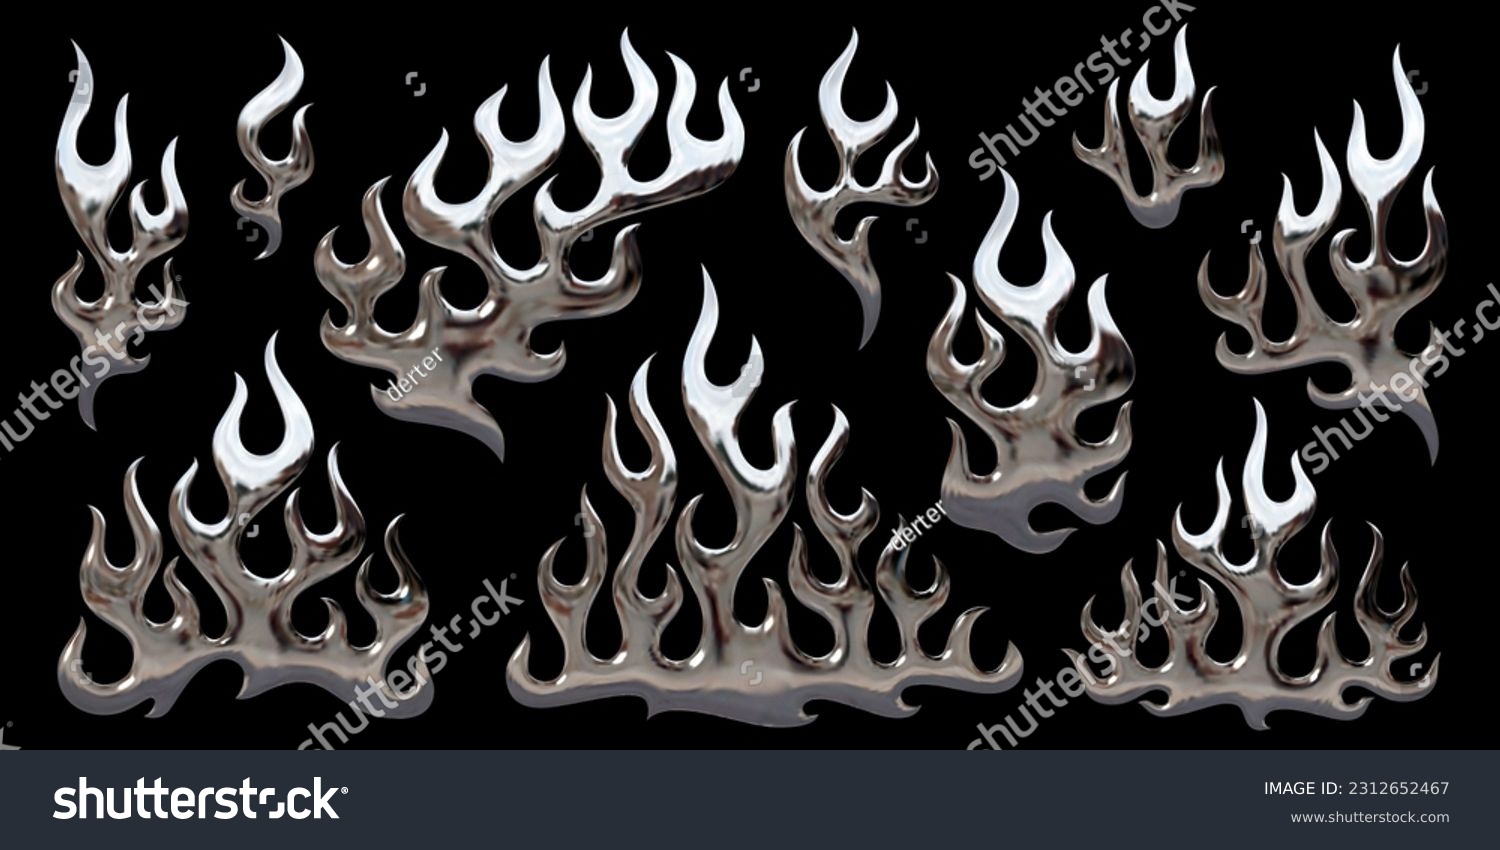 3D Y2K chromed fire shapes. Set of isolated vector elements as shiny melted metal flames in styles of chrome, silver, aluminum, platinum, steel, liquid mercury. Ideal for 2000s triball aesthetics #2312652467